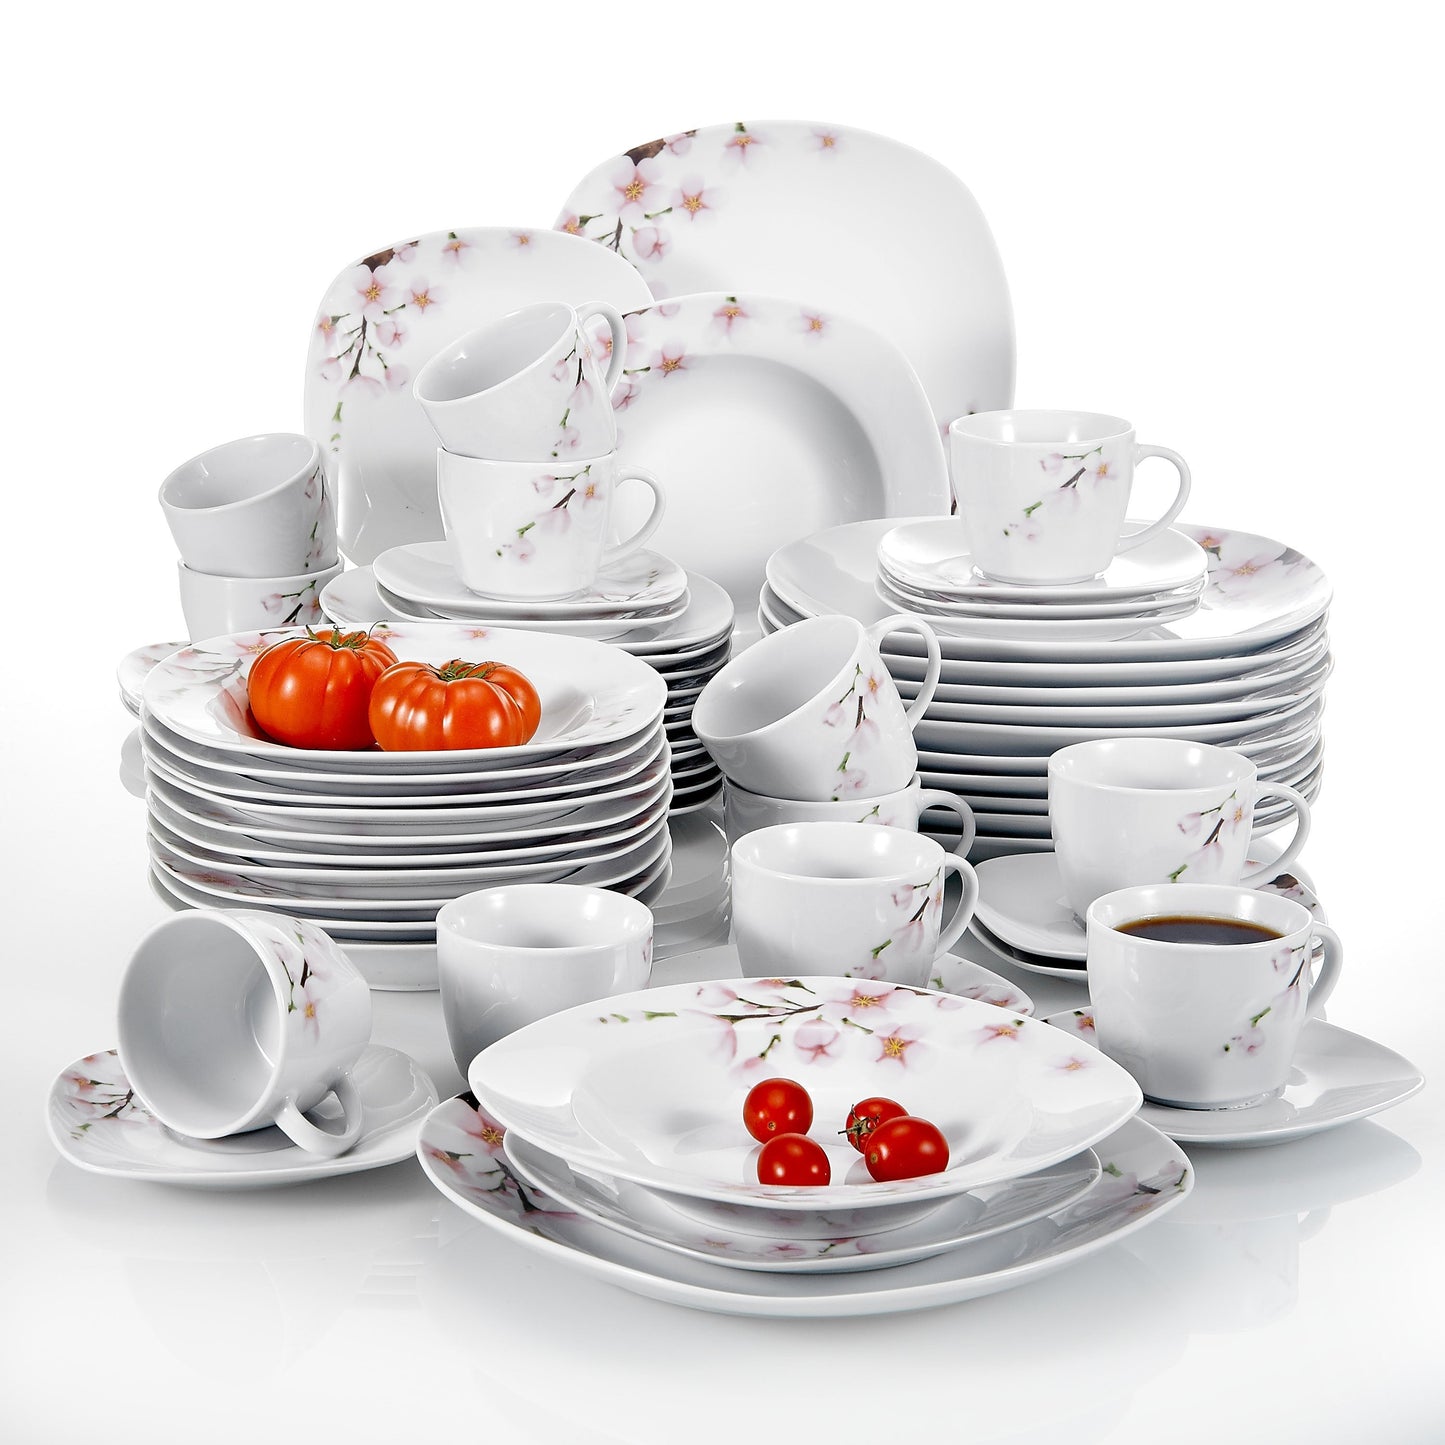 ANNIE 60-Piece White Ceramic Pink Floral Porcelain Plate Set with Dinner Plate,Soup Plate,Dessert Plate,Cups and Saucers - Nordic Side - 60, and, ANNIE, Ceramic, Dinner, Floral, Piece, Pink, 